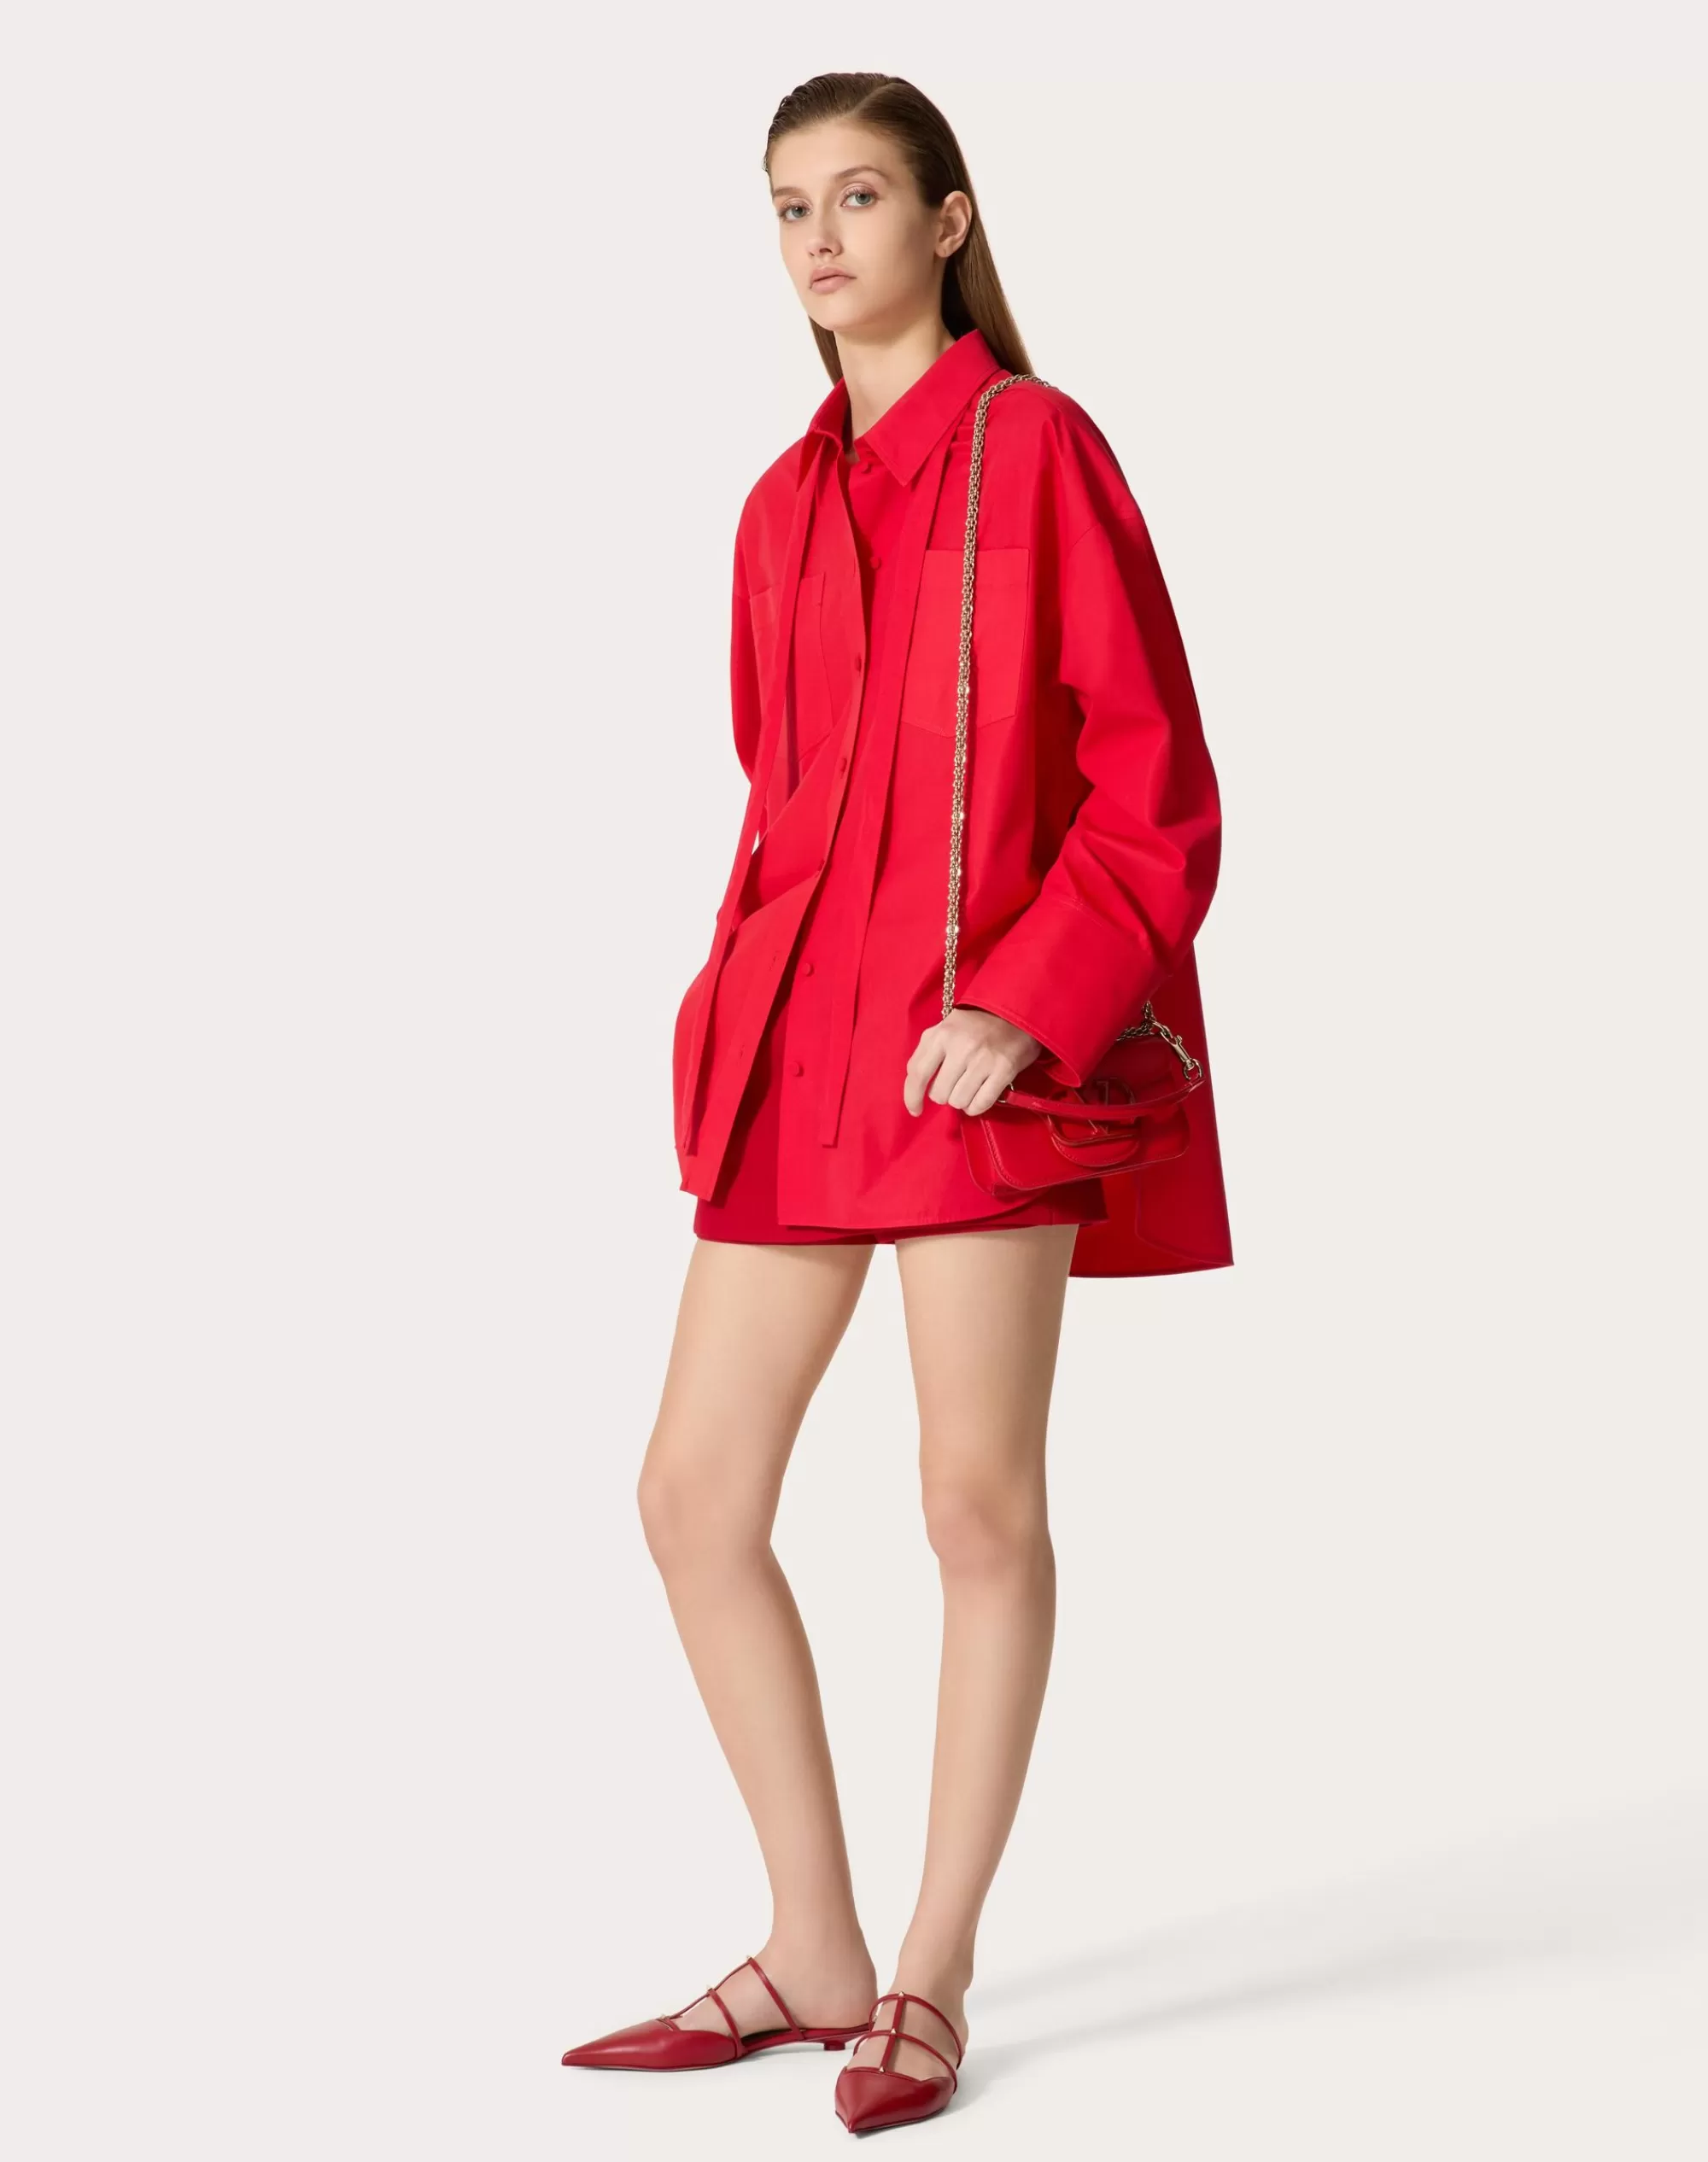 Valentino COMPACT POPELINE BLOUSE Red Flash Sale